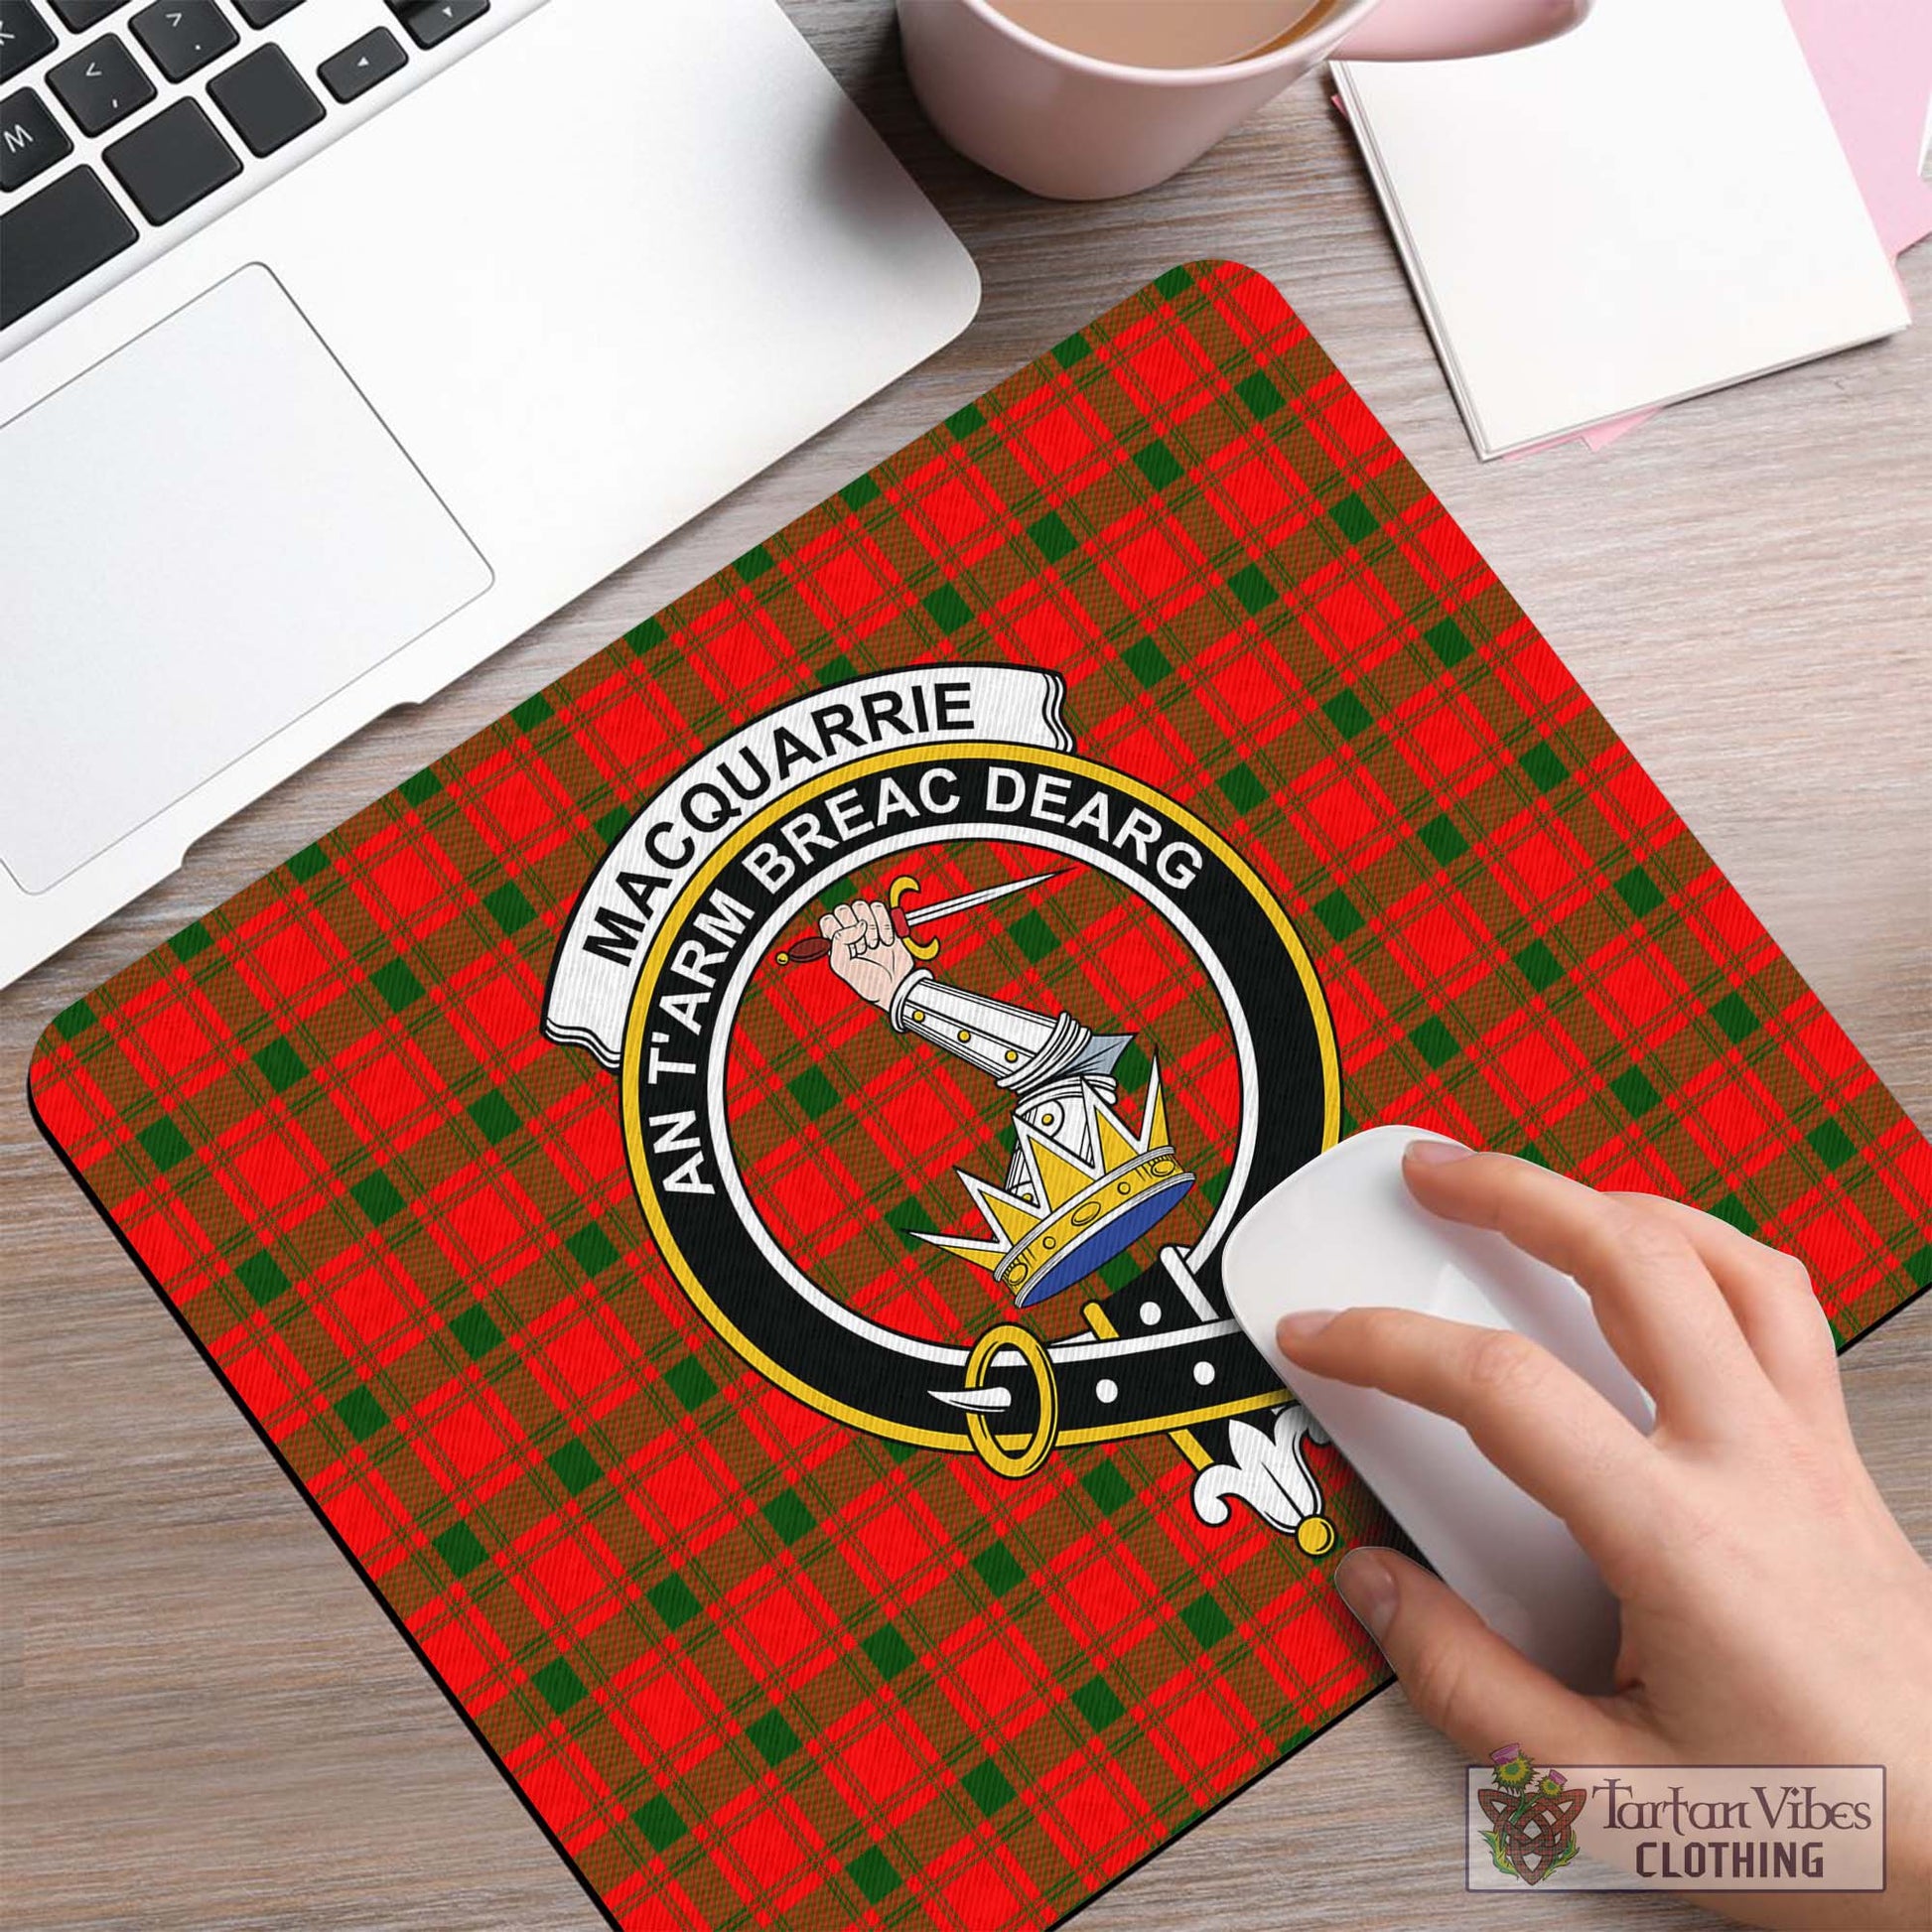 Tartan Vibes Clothing MacQuarrie Modern Tartan Mouse Pad with Family Crest